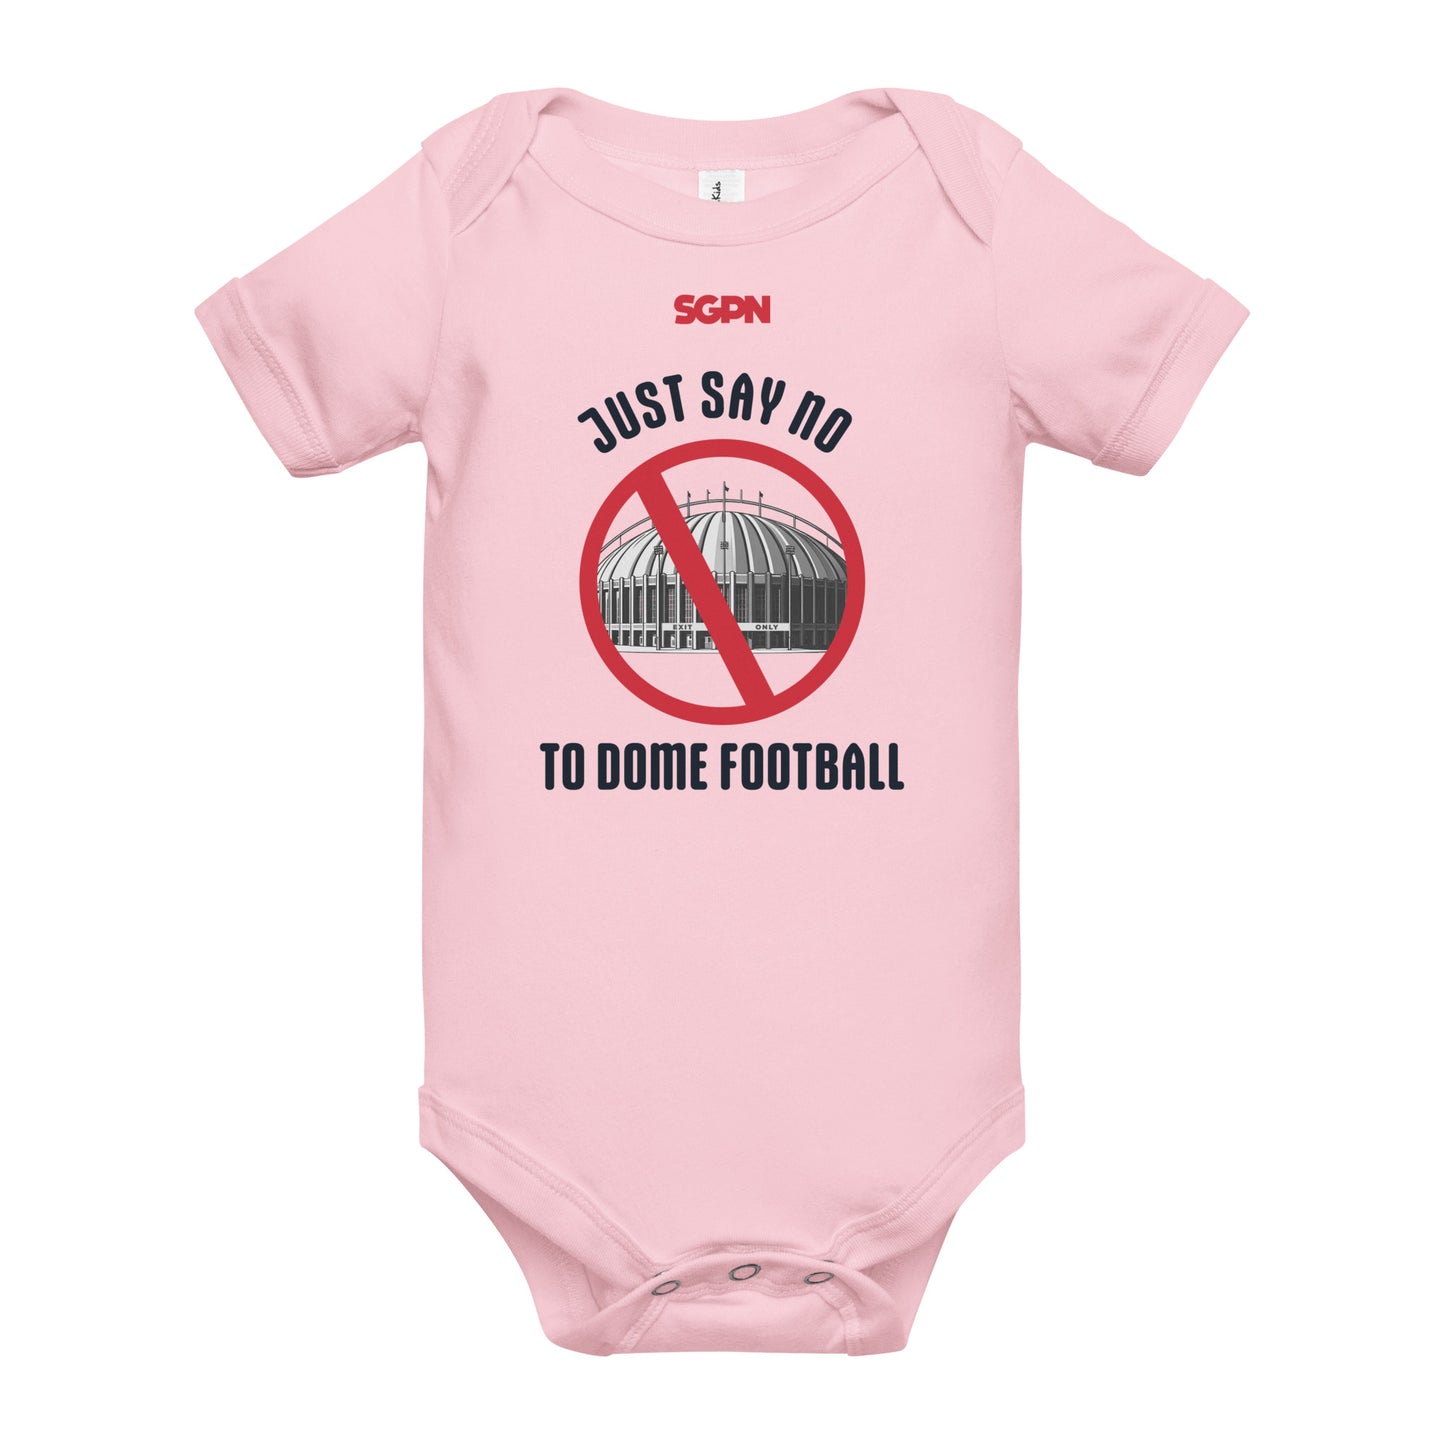 Just Say No To Dome Football - Baby short sleeve one piece